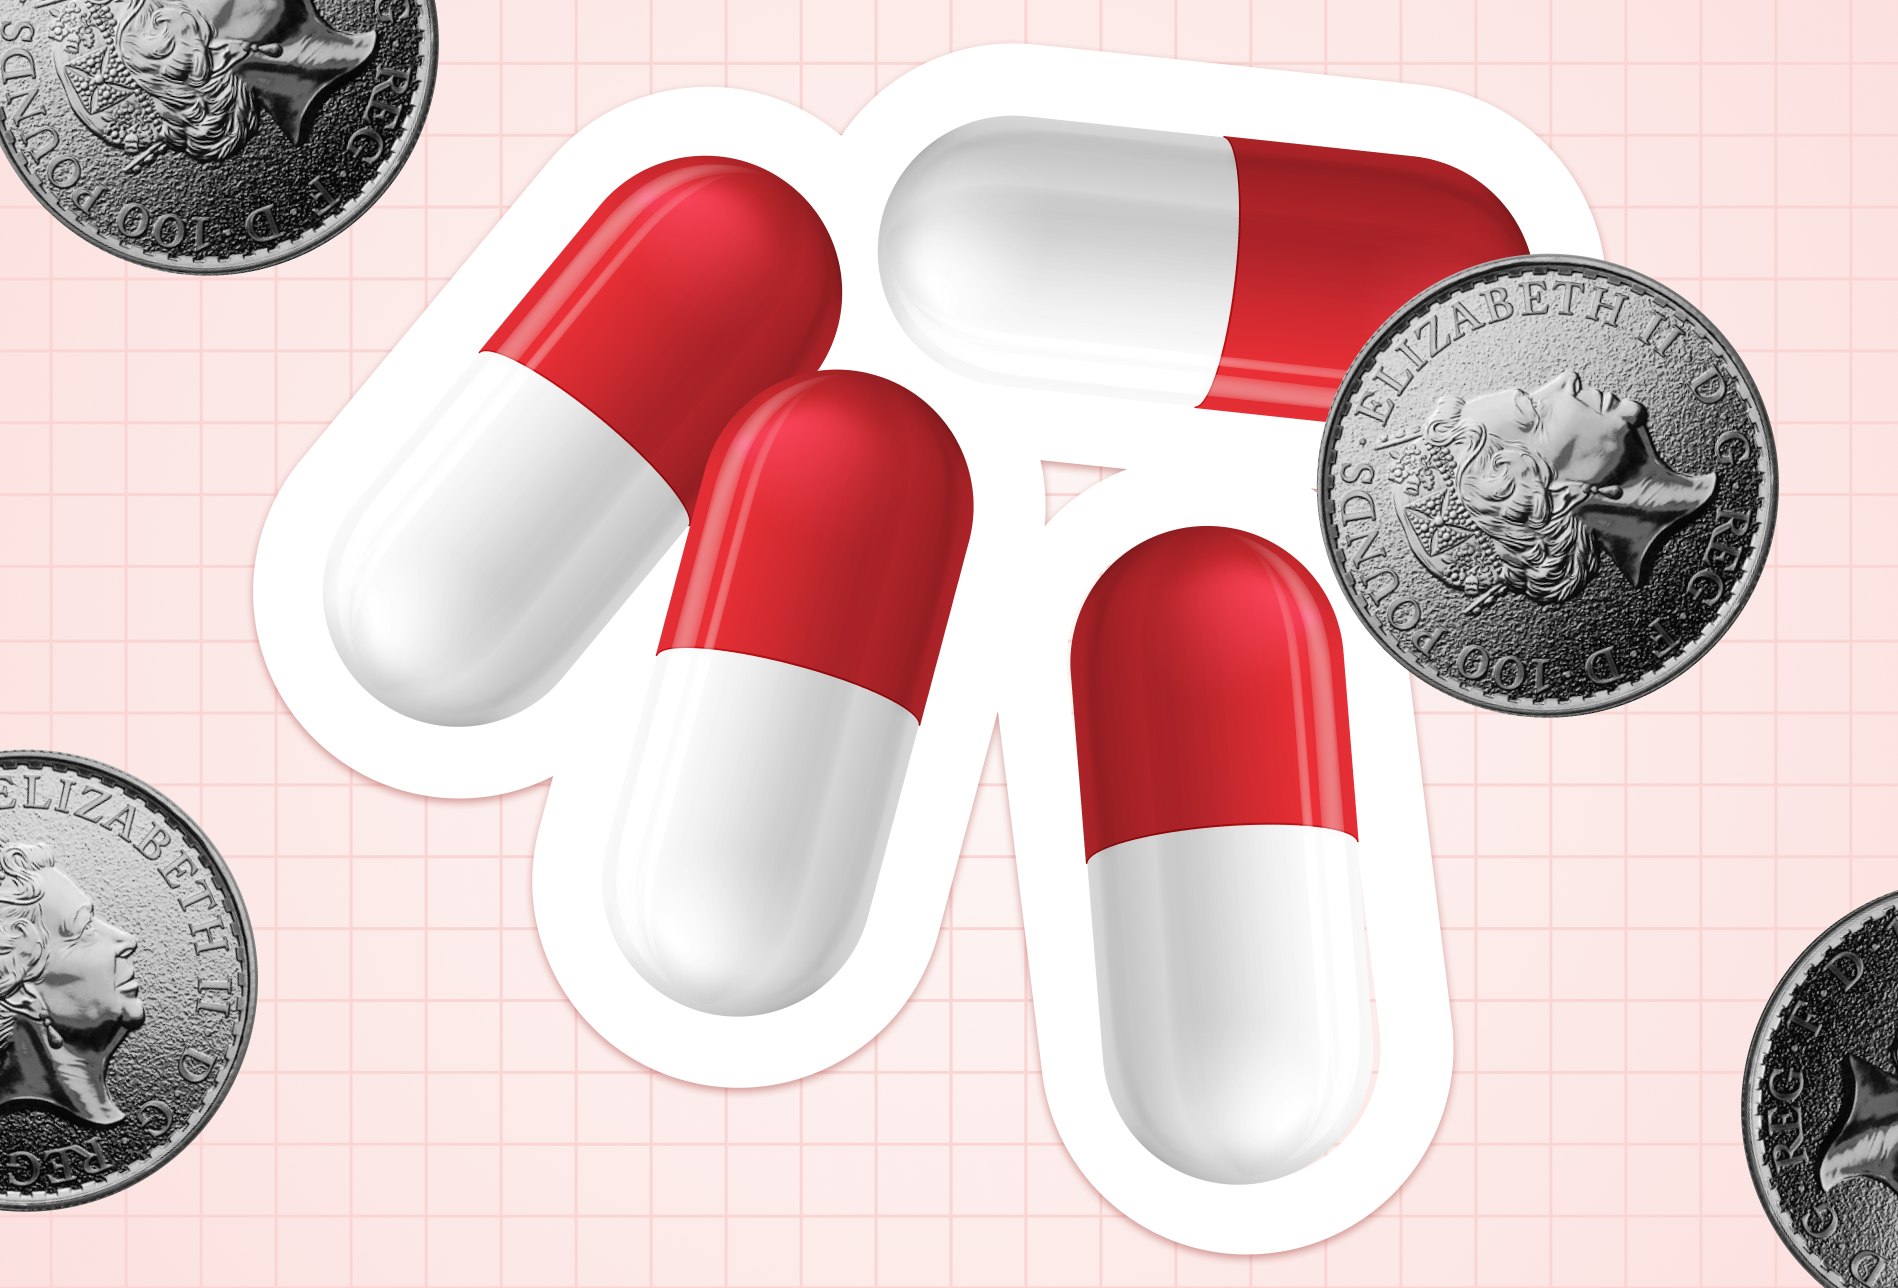 How to Start a Profitable Medical Delivery Service: Medicine pills and coins